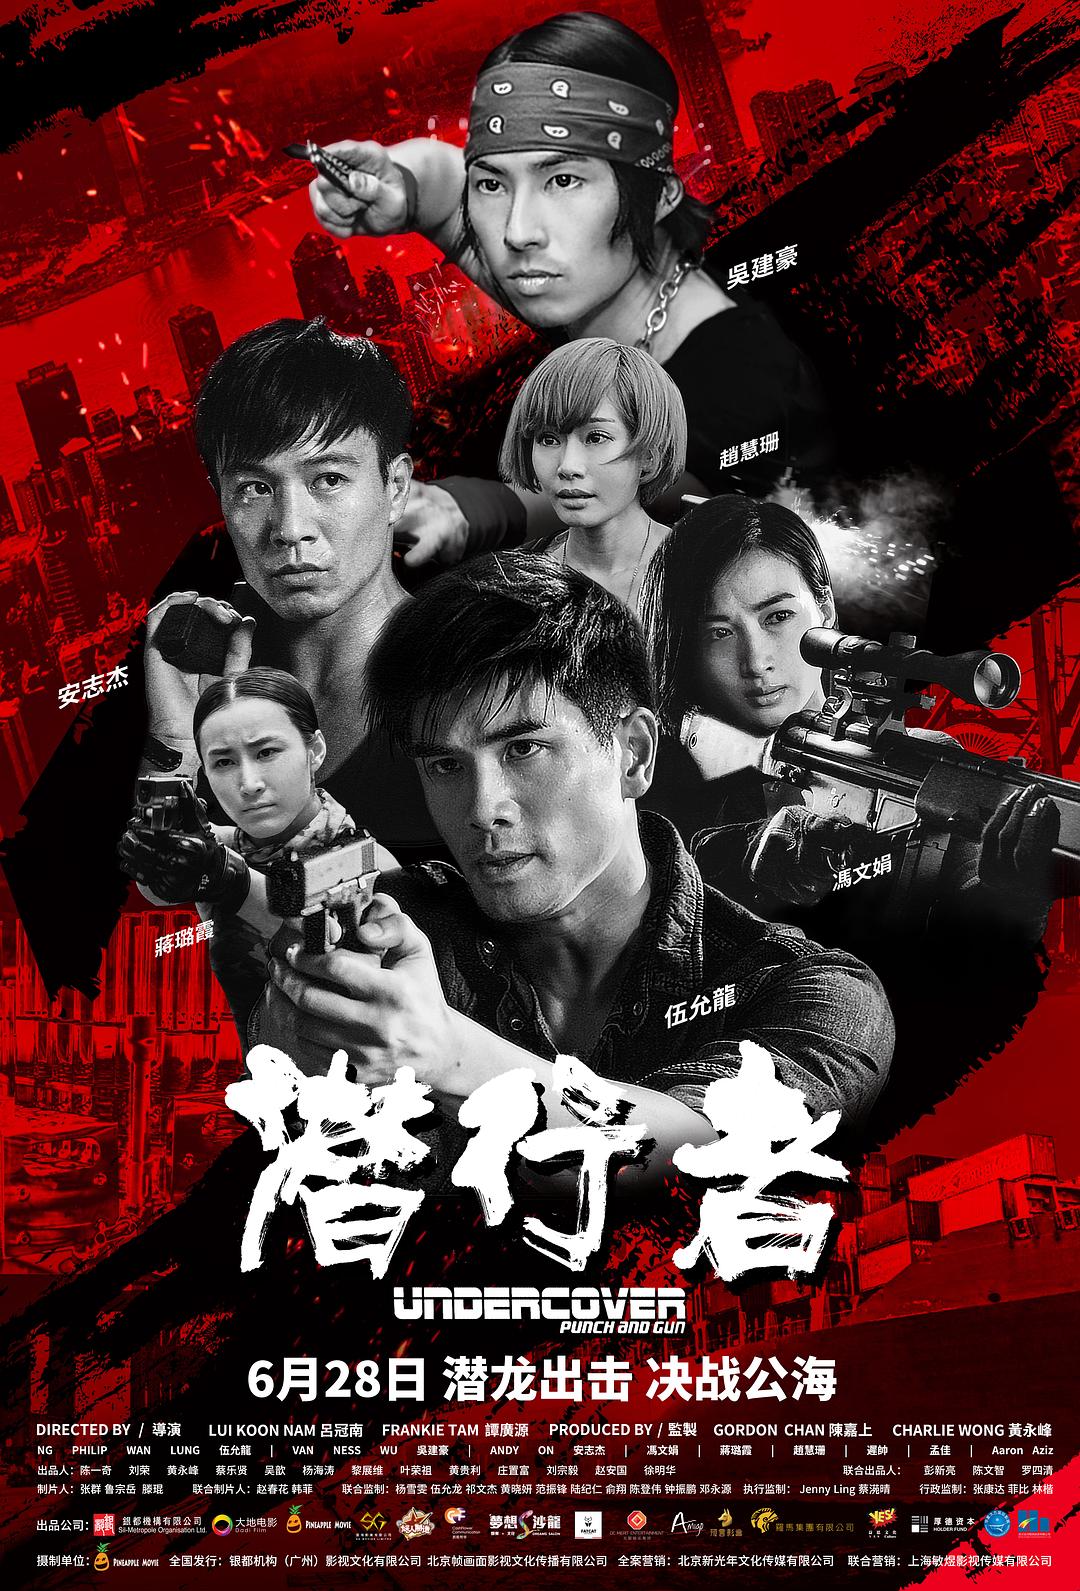 Ǳ Undercover.Punch.and.Gun.2019.CHINESE.1080p.BluRay.REMUX.AVC.DTS-HD.MA.TrueH-1.png